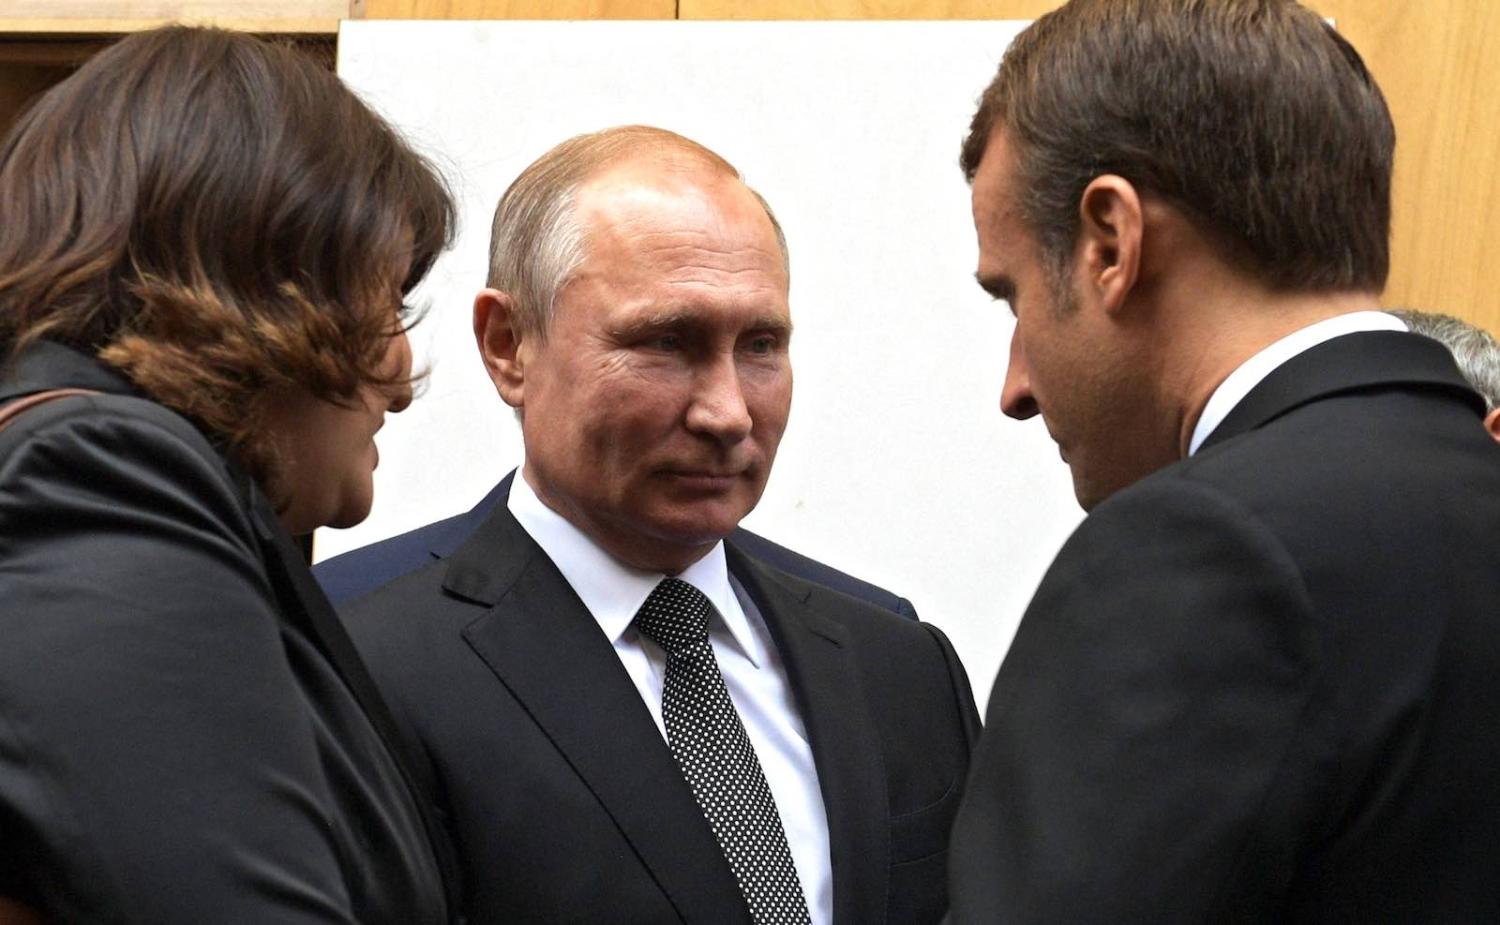 Russian President Vladimir Putin with French President Emmanuel Macron at the memorial service for former French President Jacques Chirac, 30 September 2019 (Photo: kremlin.ru)